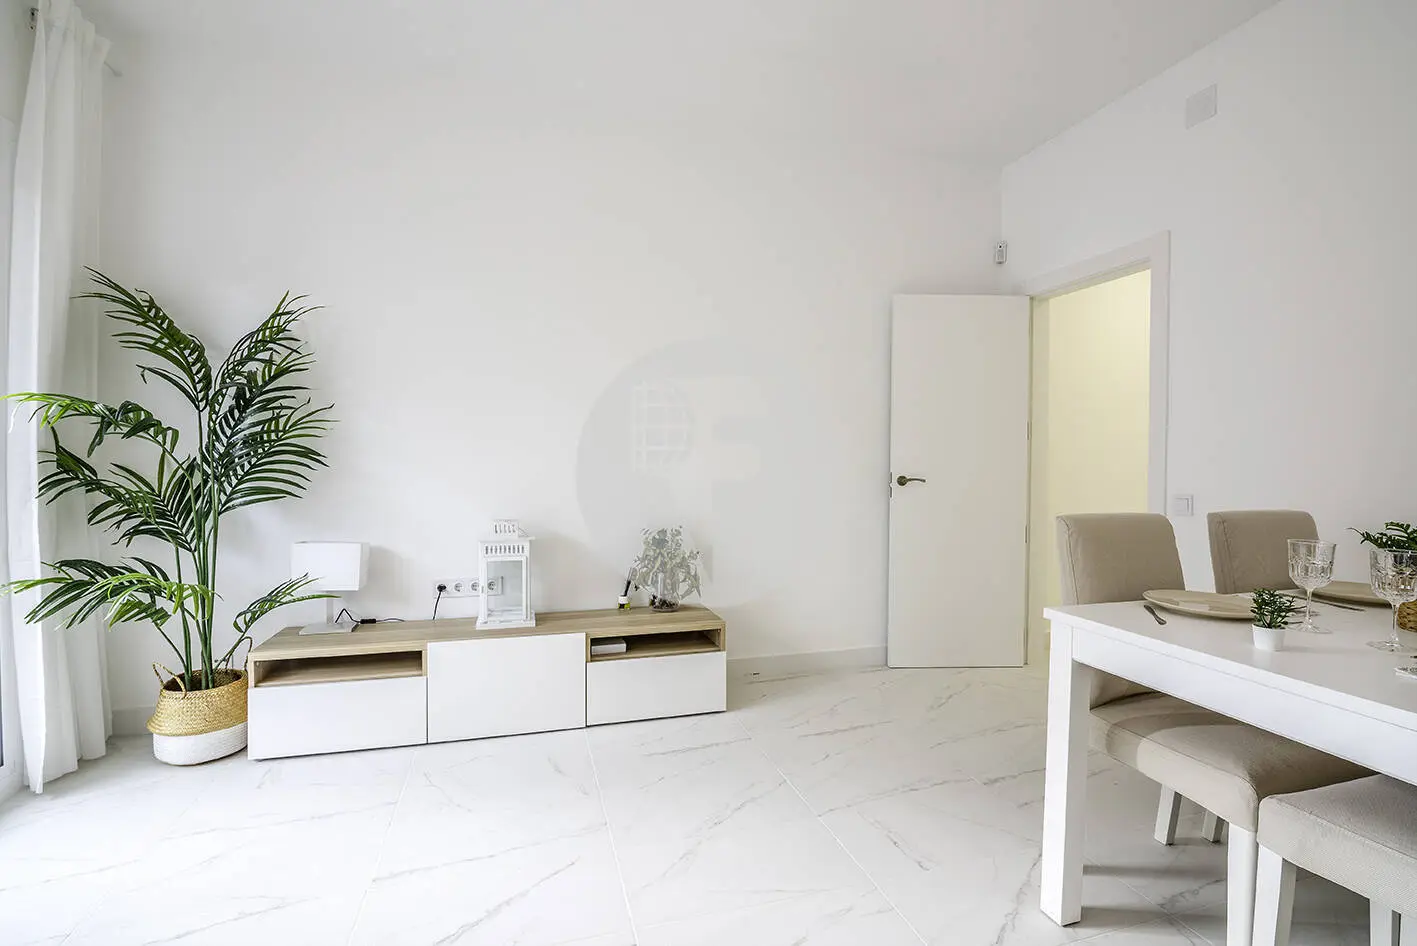 Brand new completely renovated apartment on Aragó street in the heart of El Clot in Barcelona. 8